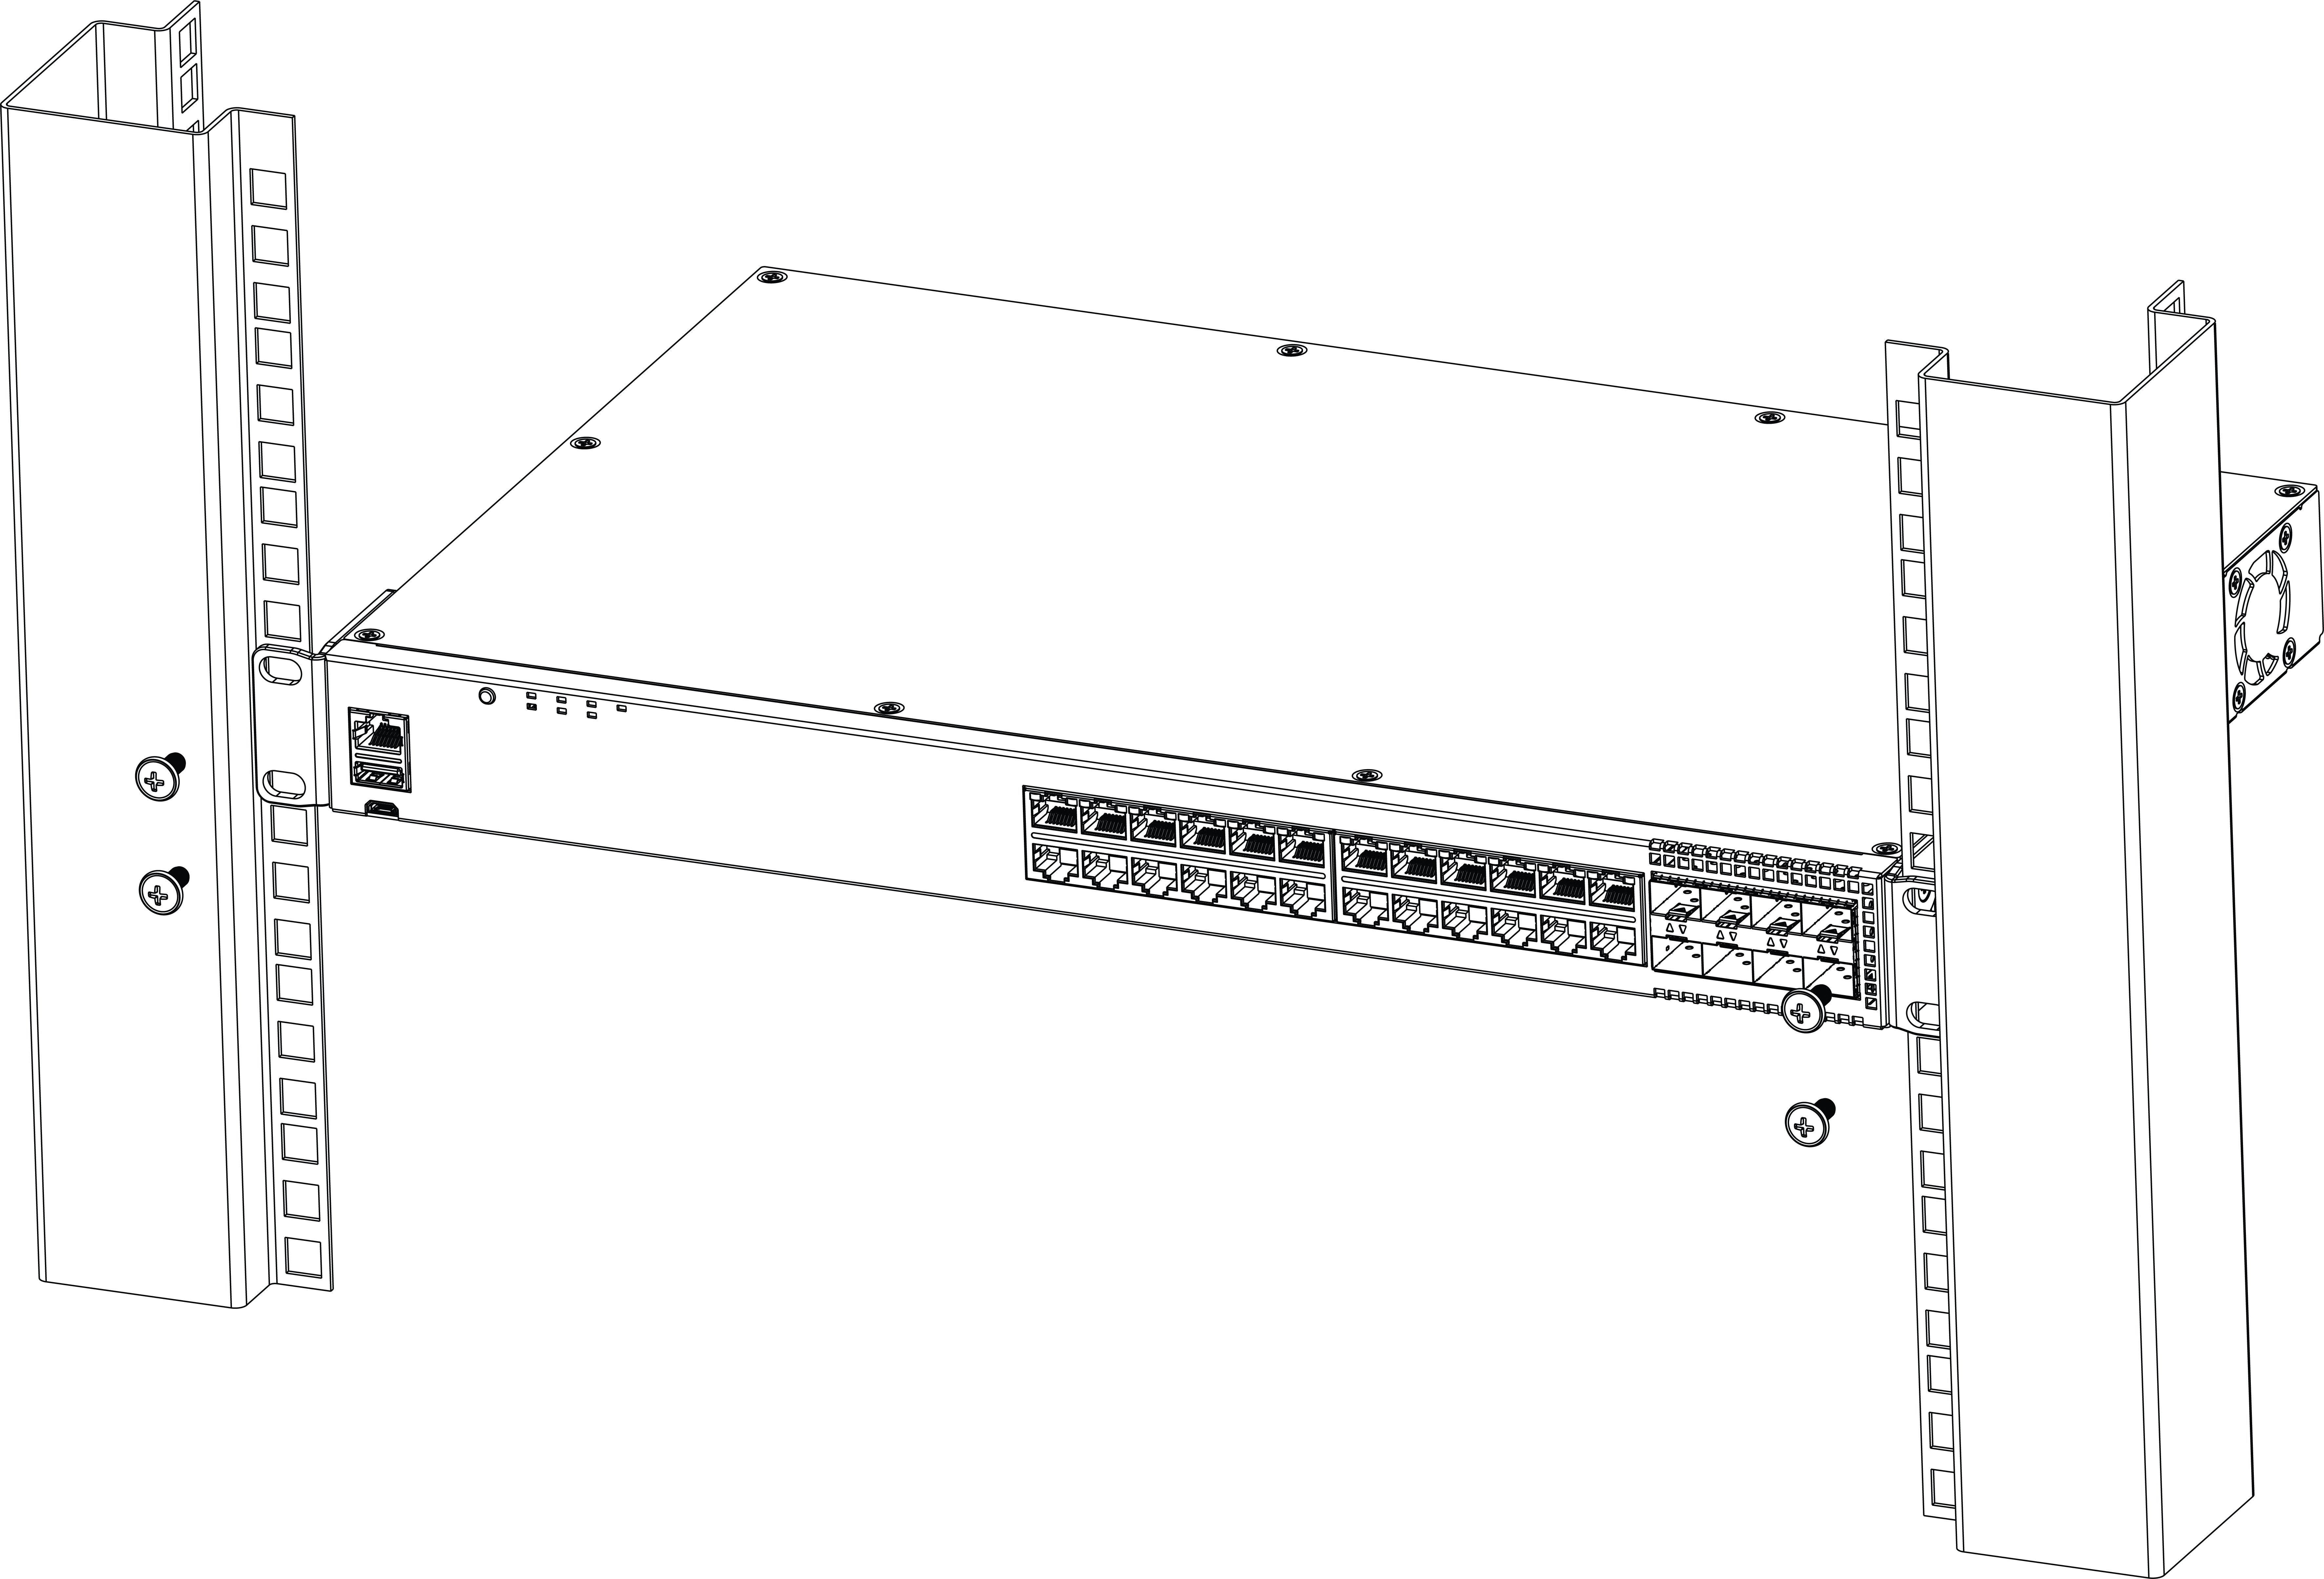 Flush-Mount: Mounting in a Two- or Four-Post Rack for models 5320-24T-8XE and 5320-24P-8XE